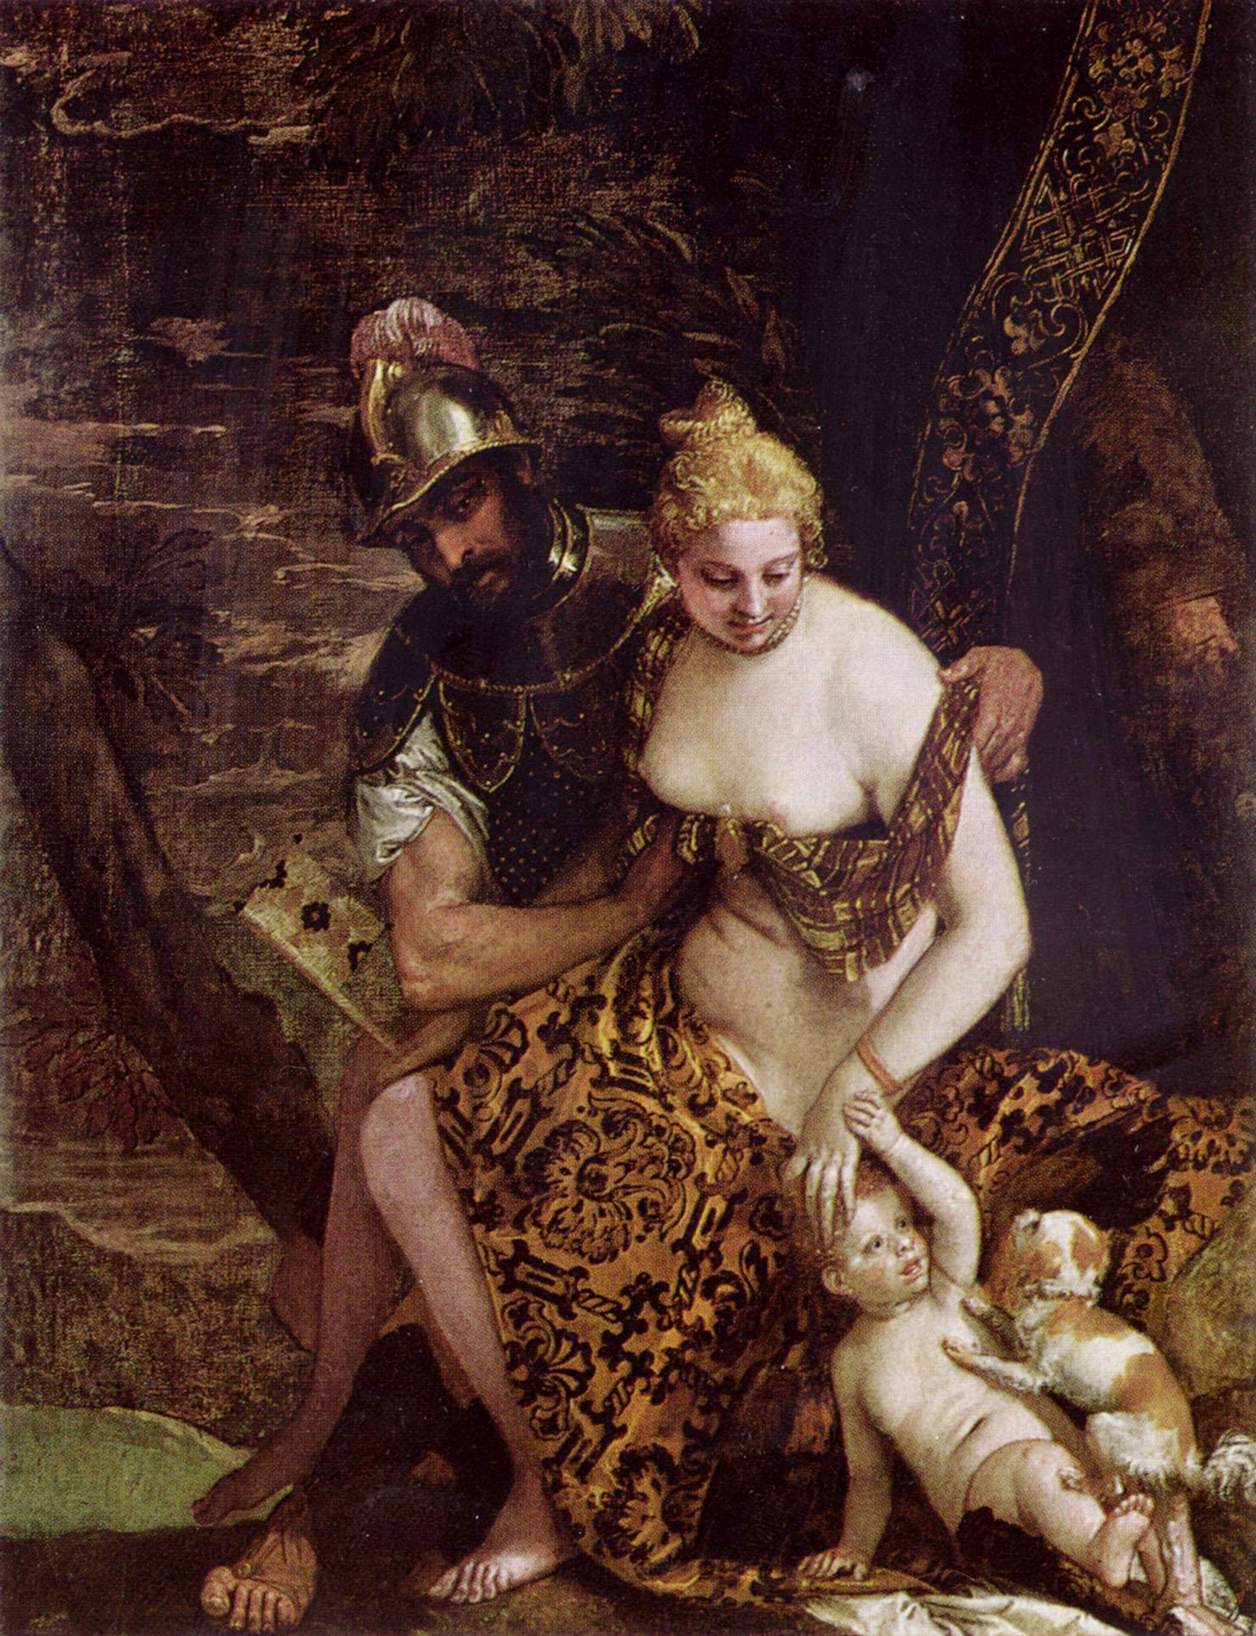 Venus And Mars by Paolo Veronese, 1581